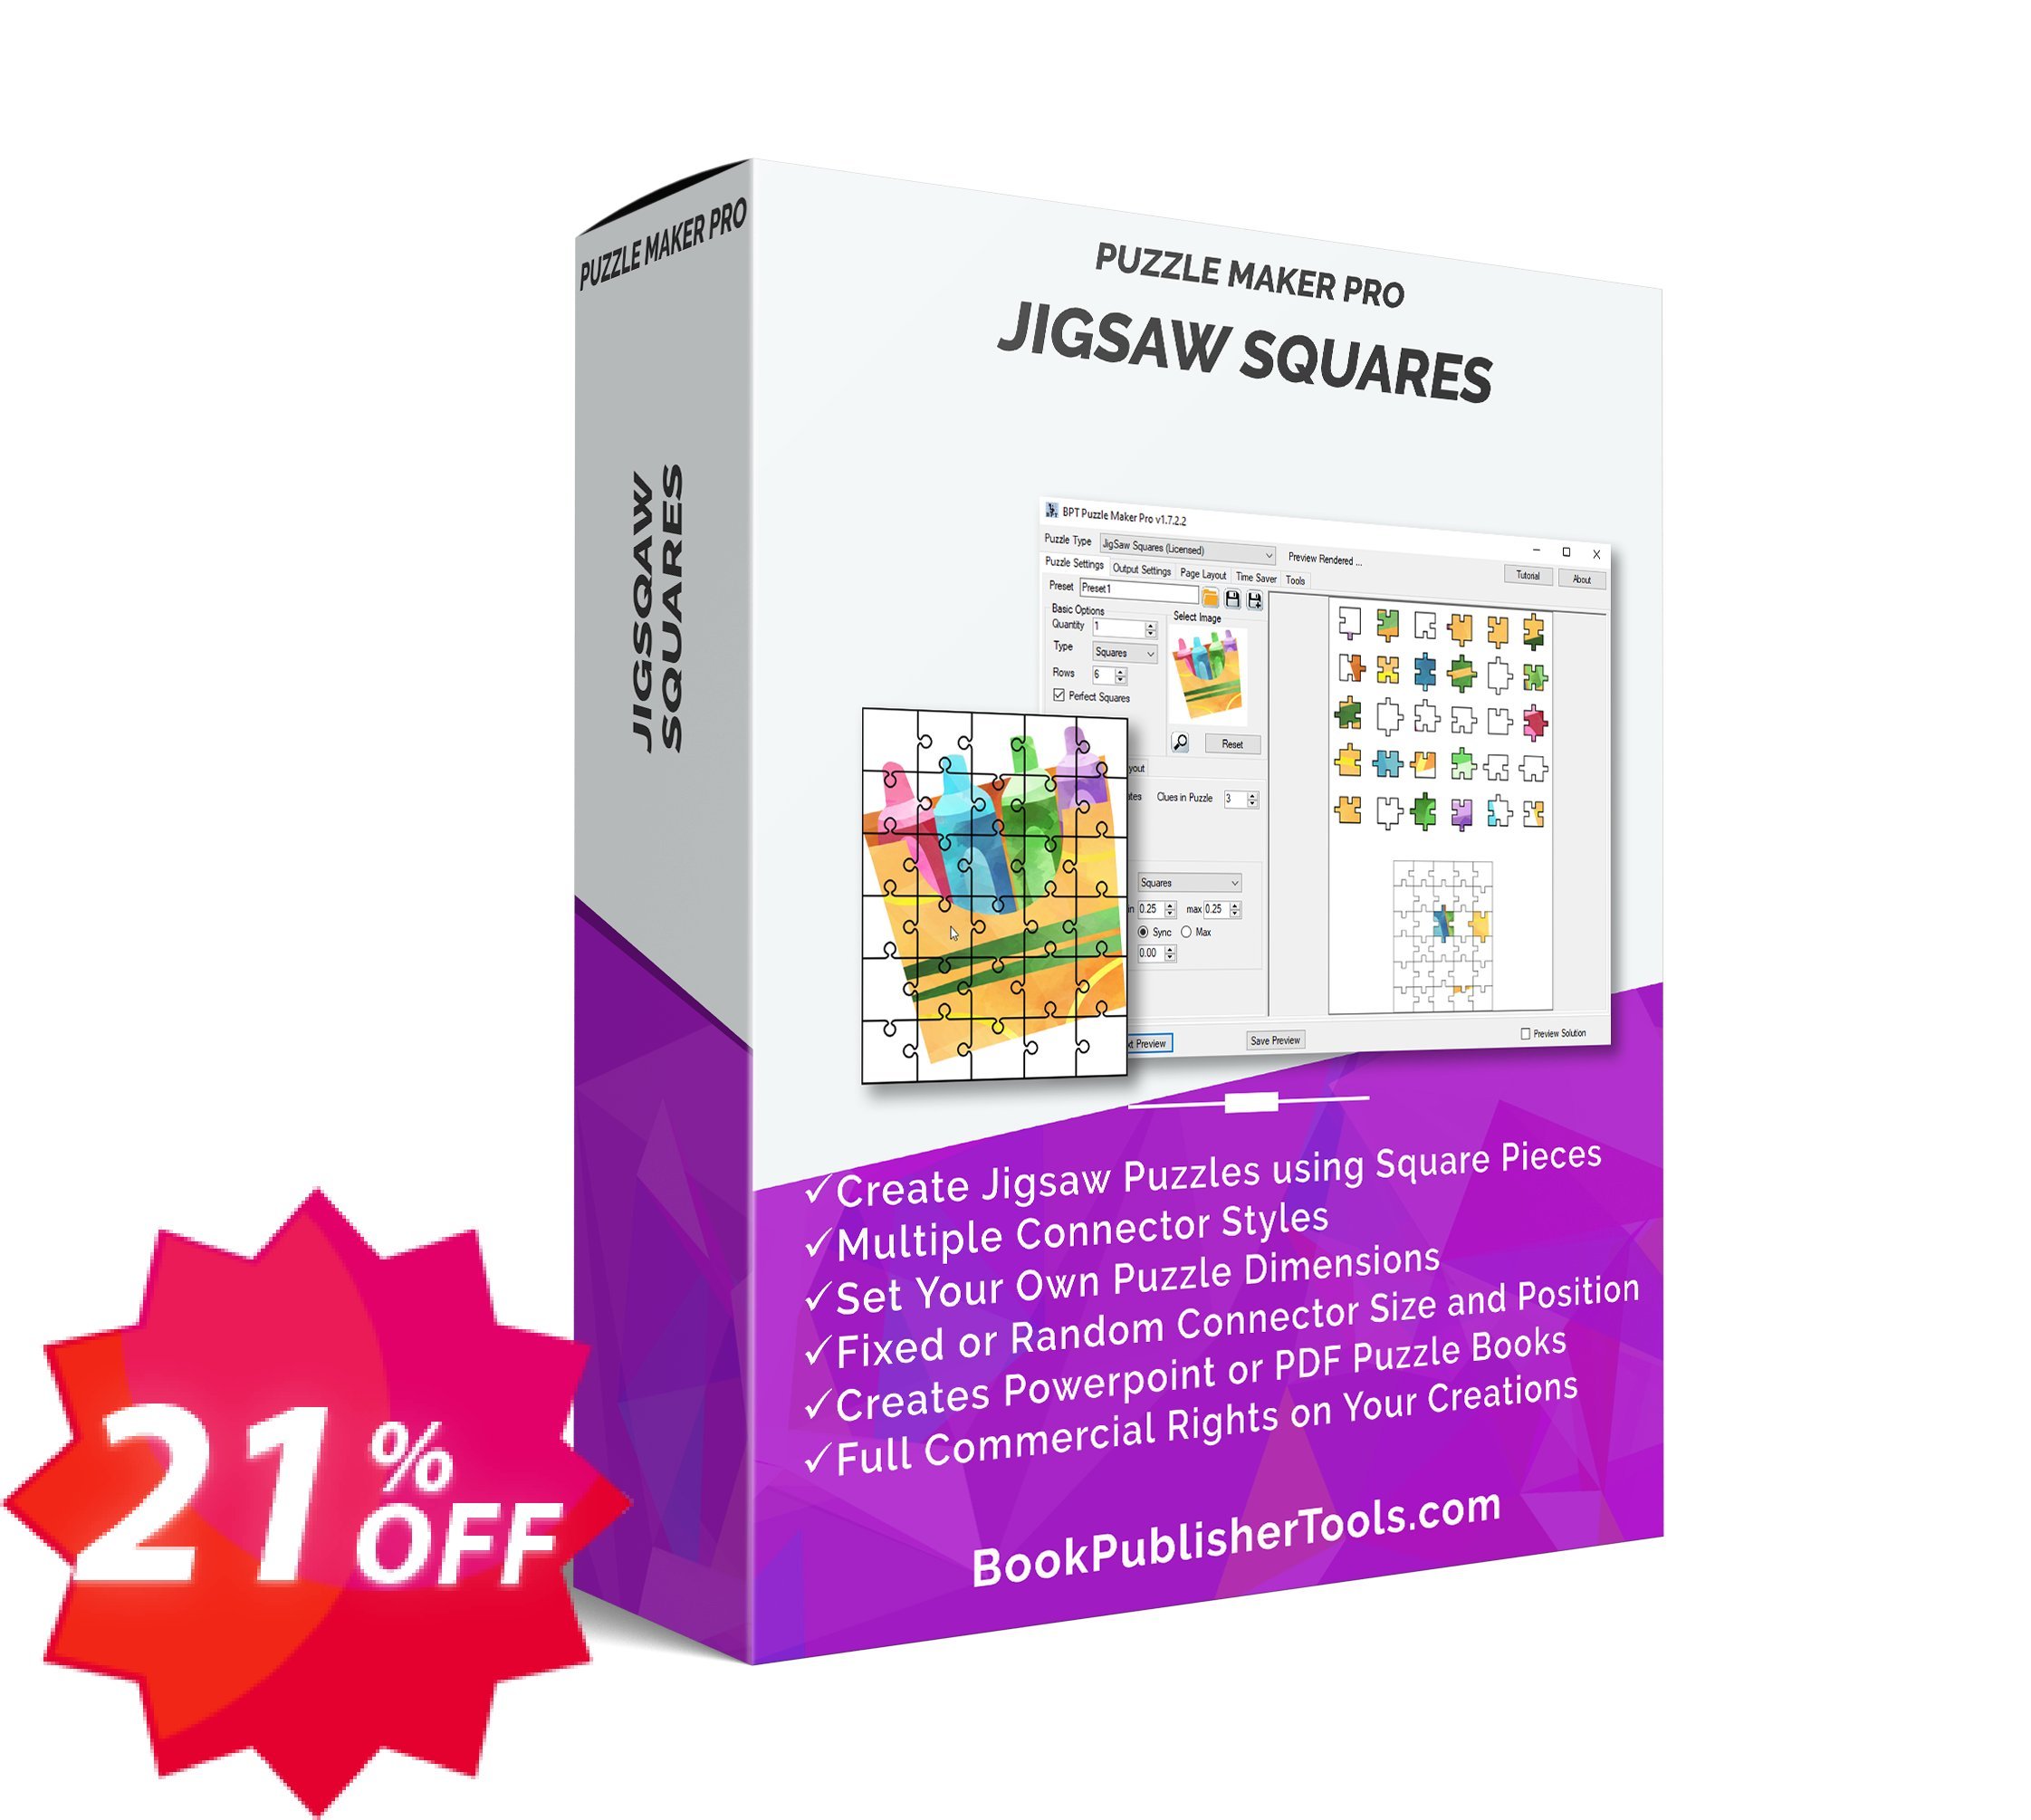 Puzzle Maker Pro - JigSaw Squares Coupon code 21% discount 